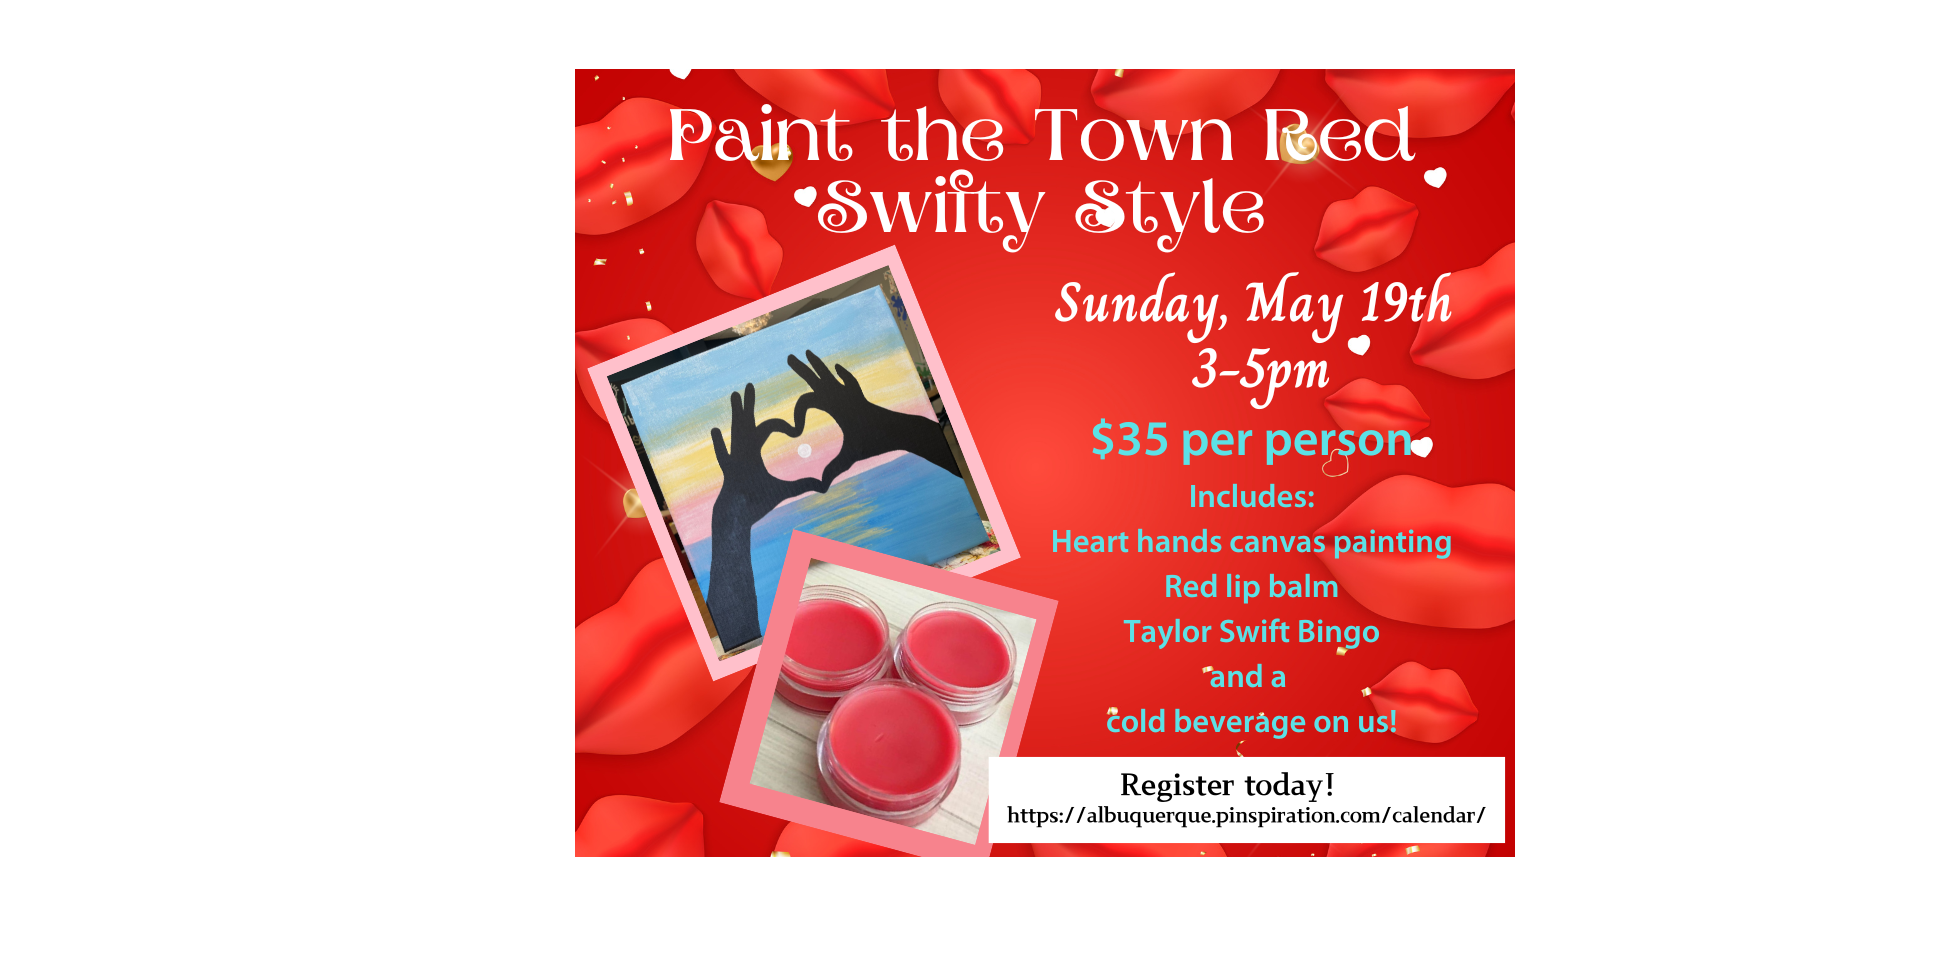 Paint the Town Red Swifty Style